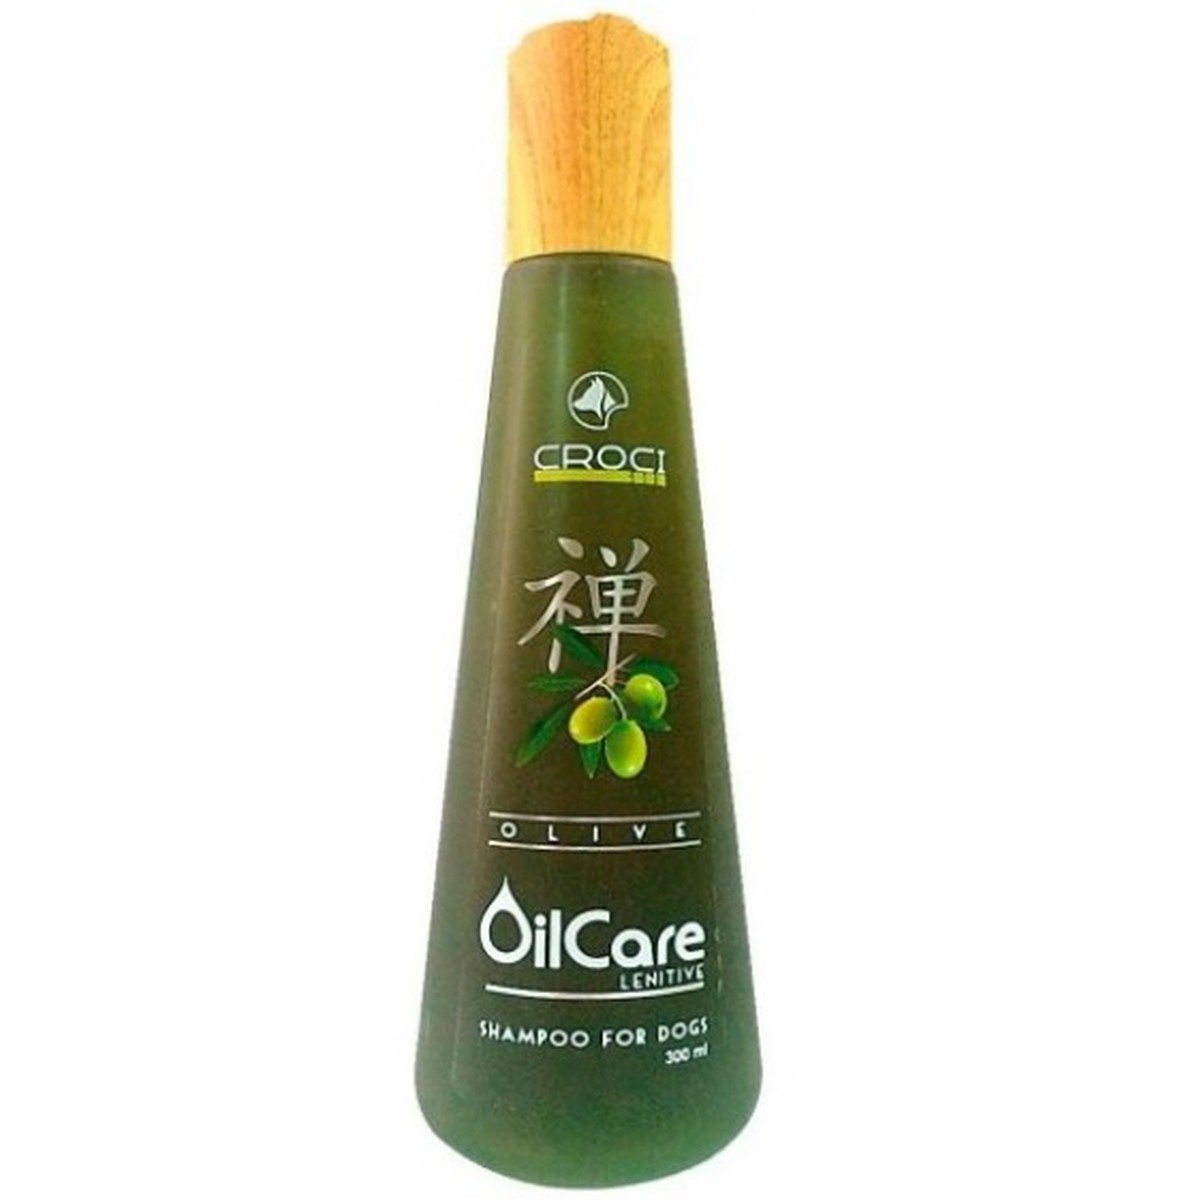   Shampoing  Oilcare Lenitive  à l'huile d'olive 300ml  300ml